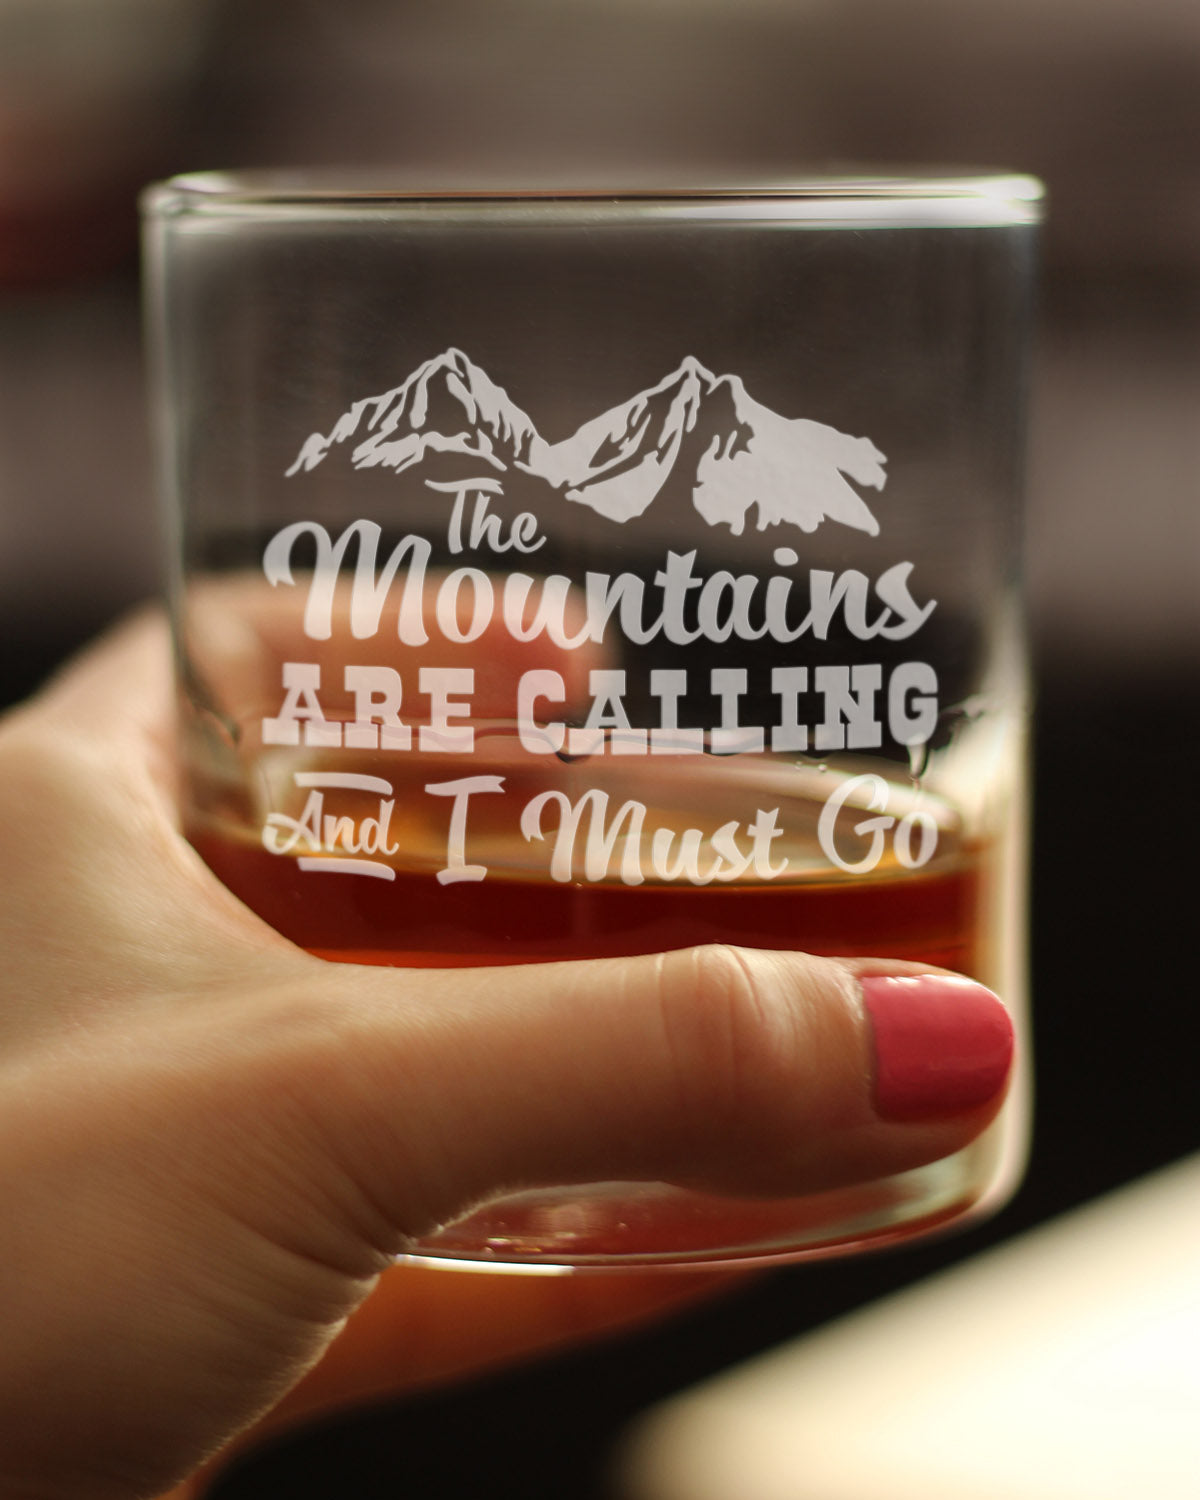 Mountains are Calling - Funny Whiskey Rocks Glass Gifts for Outdoorsy Men &amp; Women - Fun Whisky Drinking Tumbler Décor